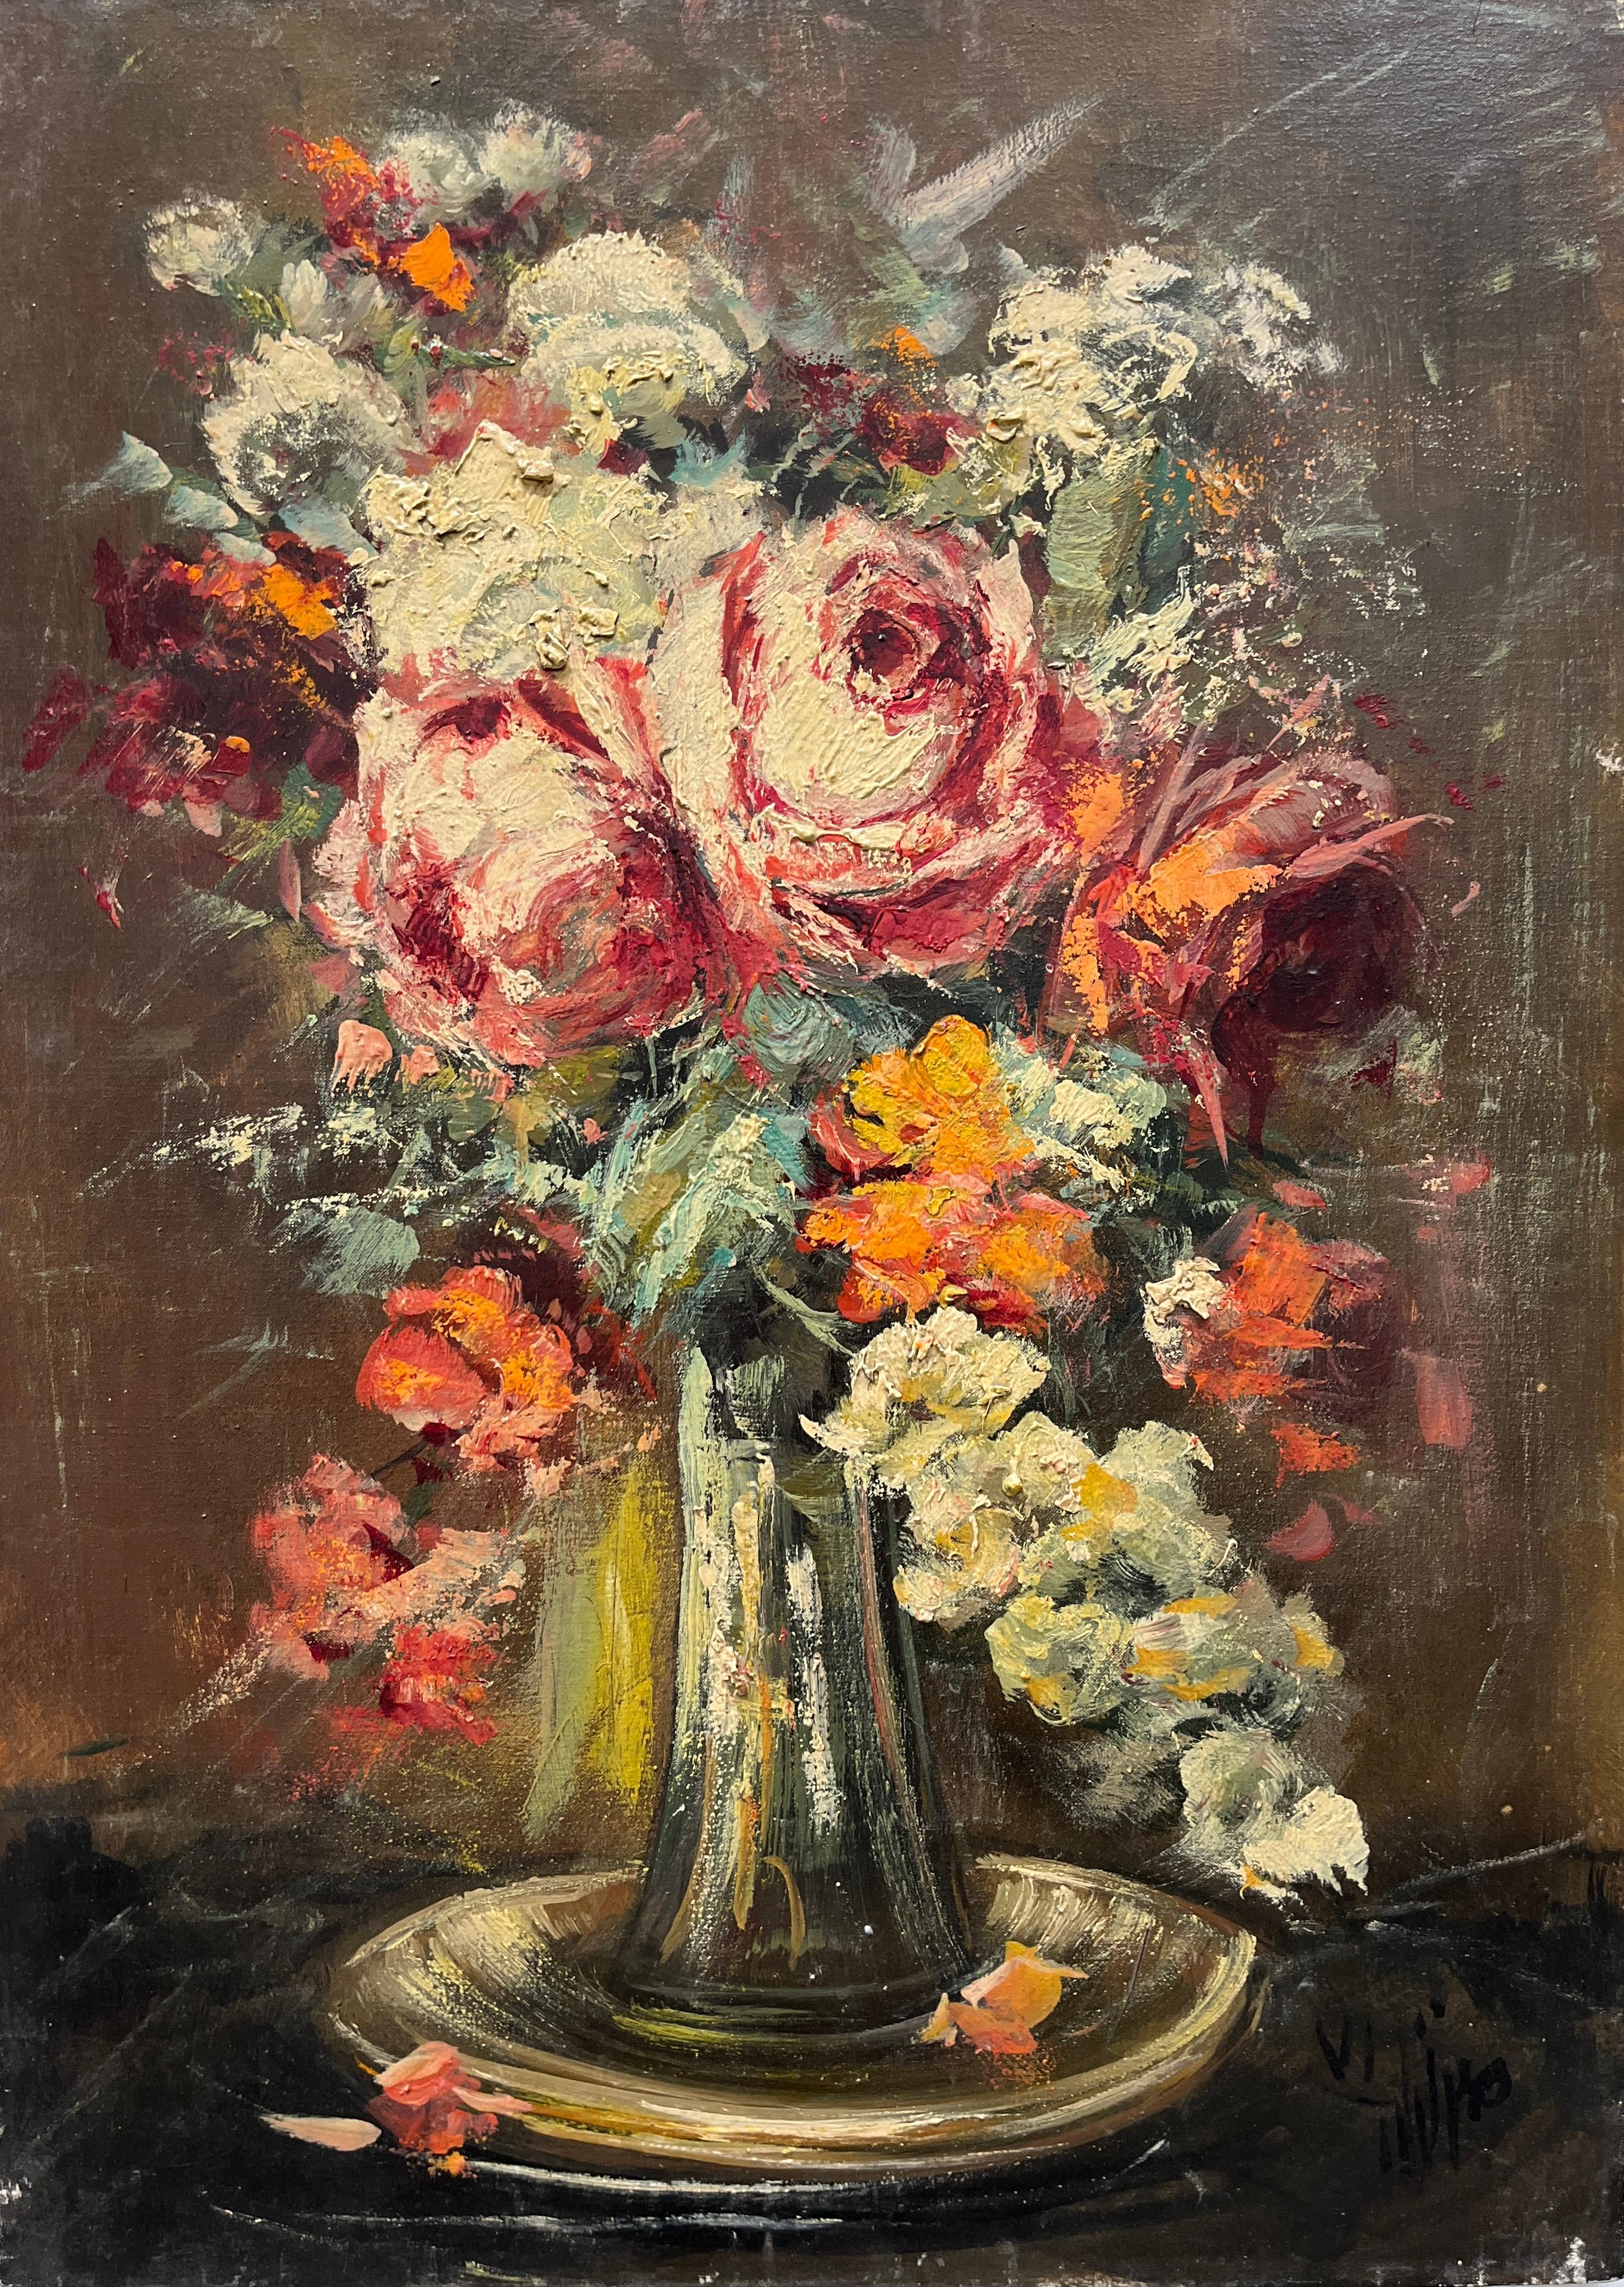 The artist has carefully arranged the bouquet to evoke a sense of closeness and connection, as if the roses are whispering to each other in hushed tones. The surrounding canvas provide a unique backdrop, with their mysterious and undulating forms